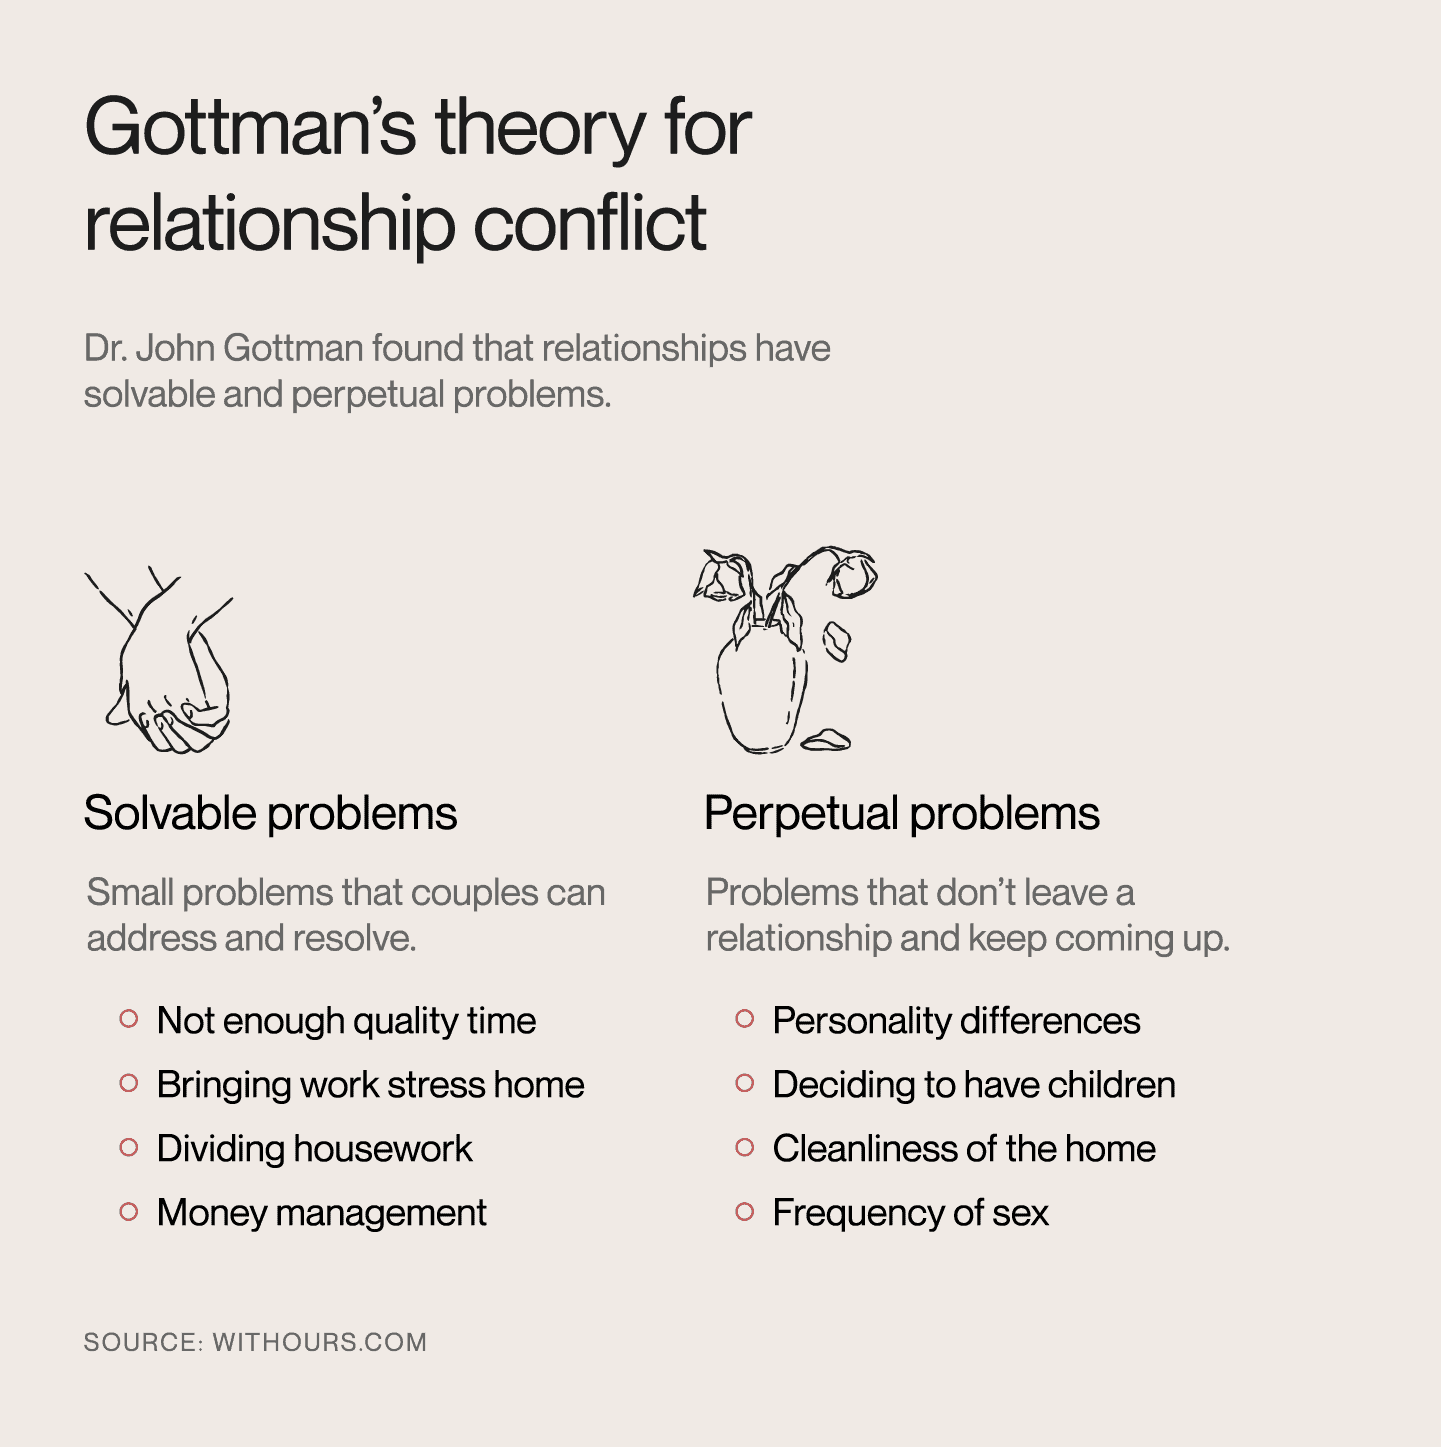 Graphic of John Gottman's theory for relationship conflict involving solvable and perpetual problems.